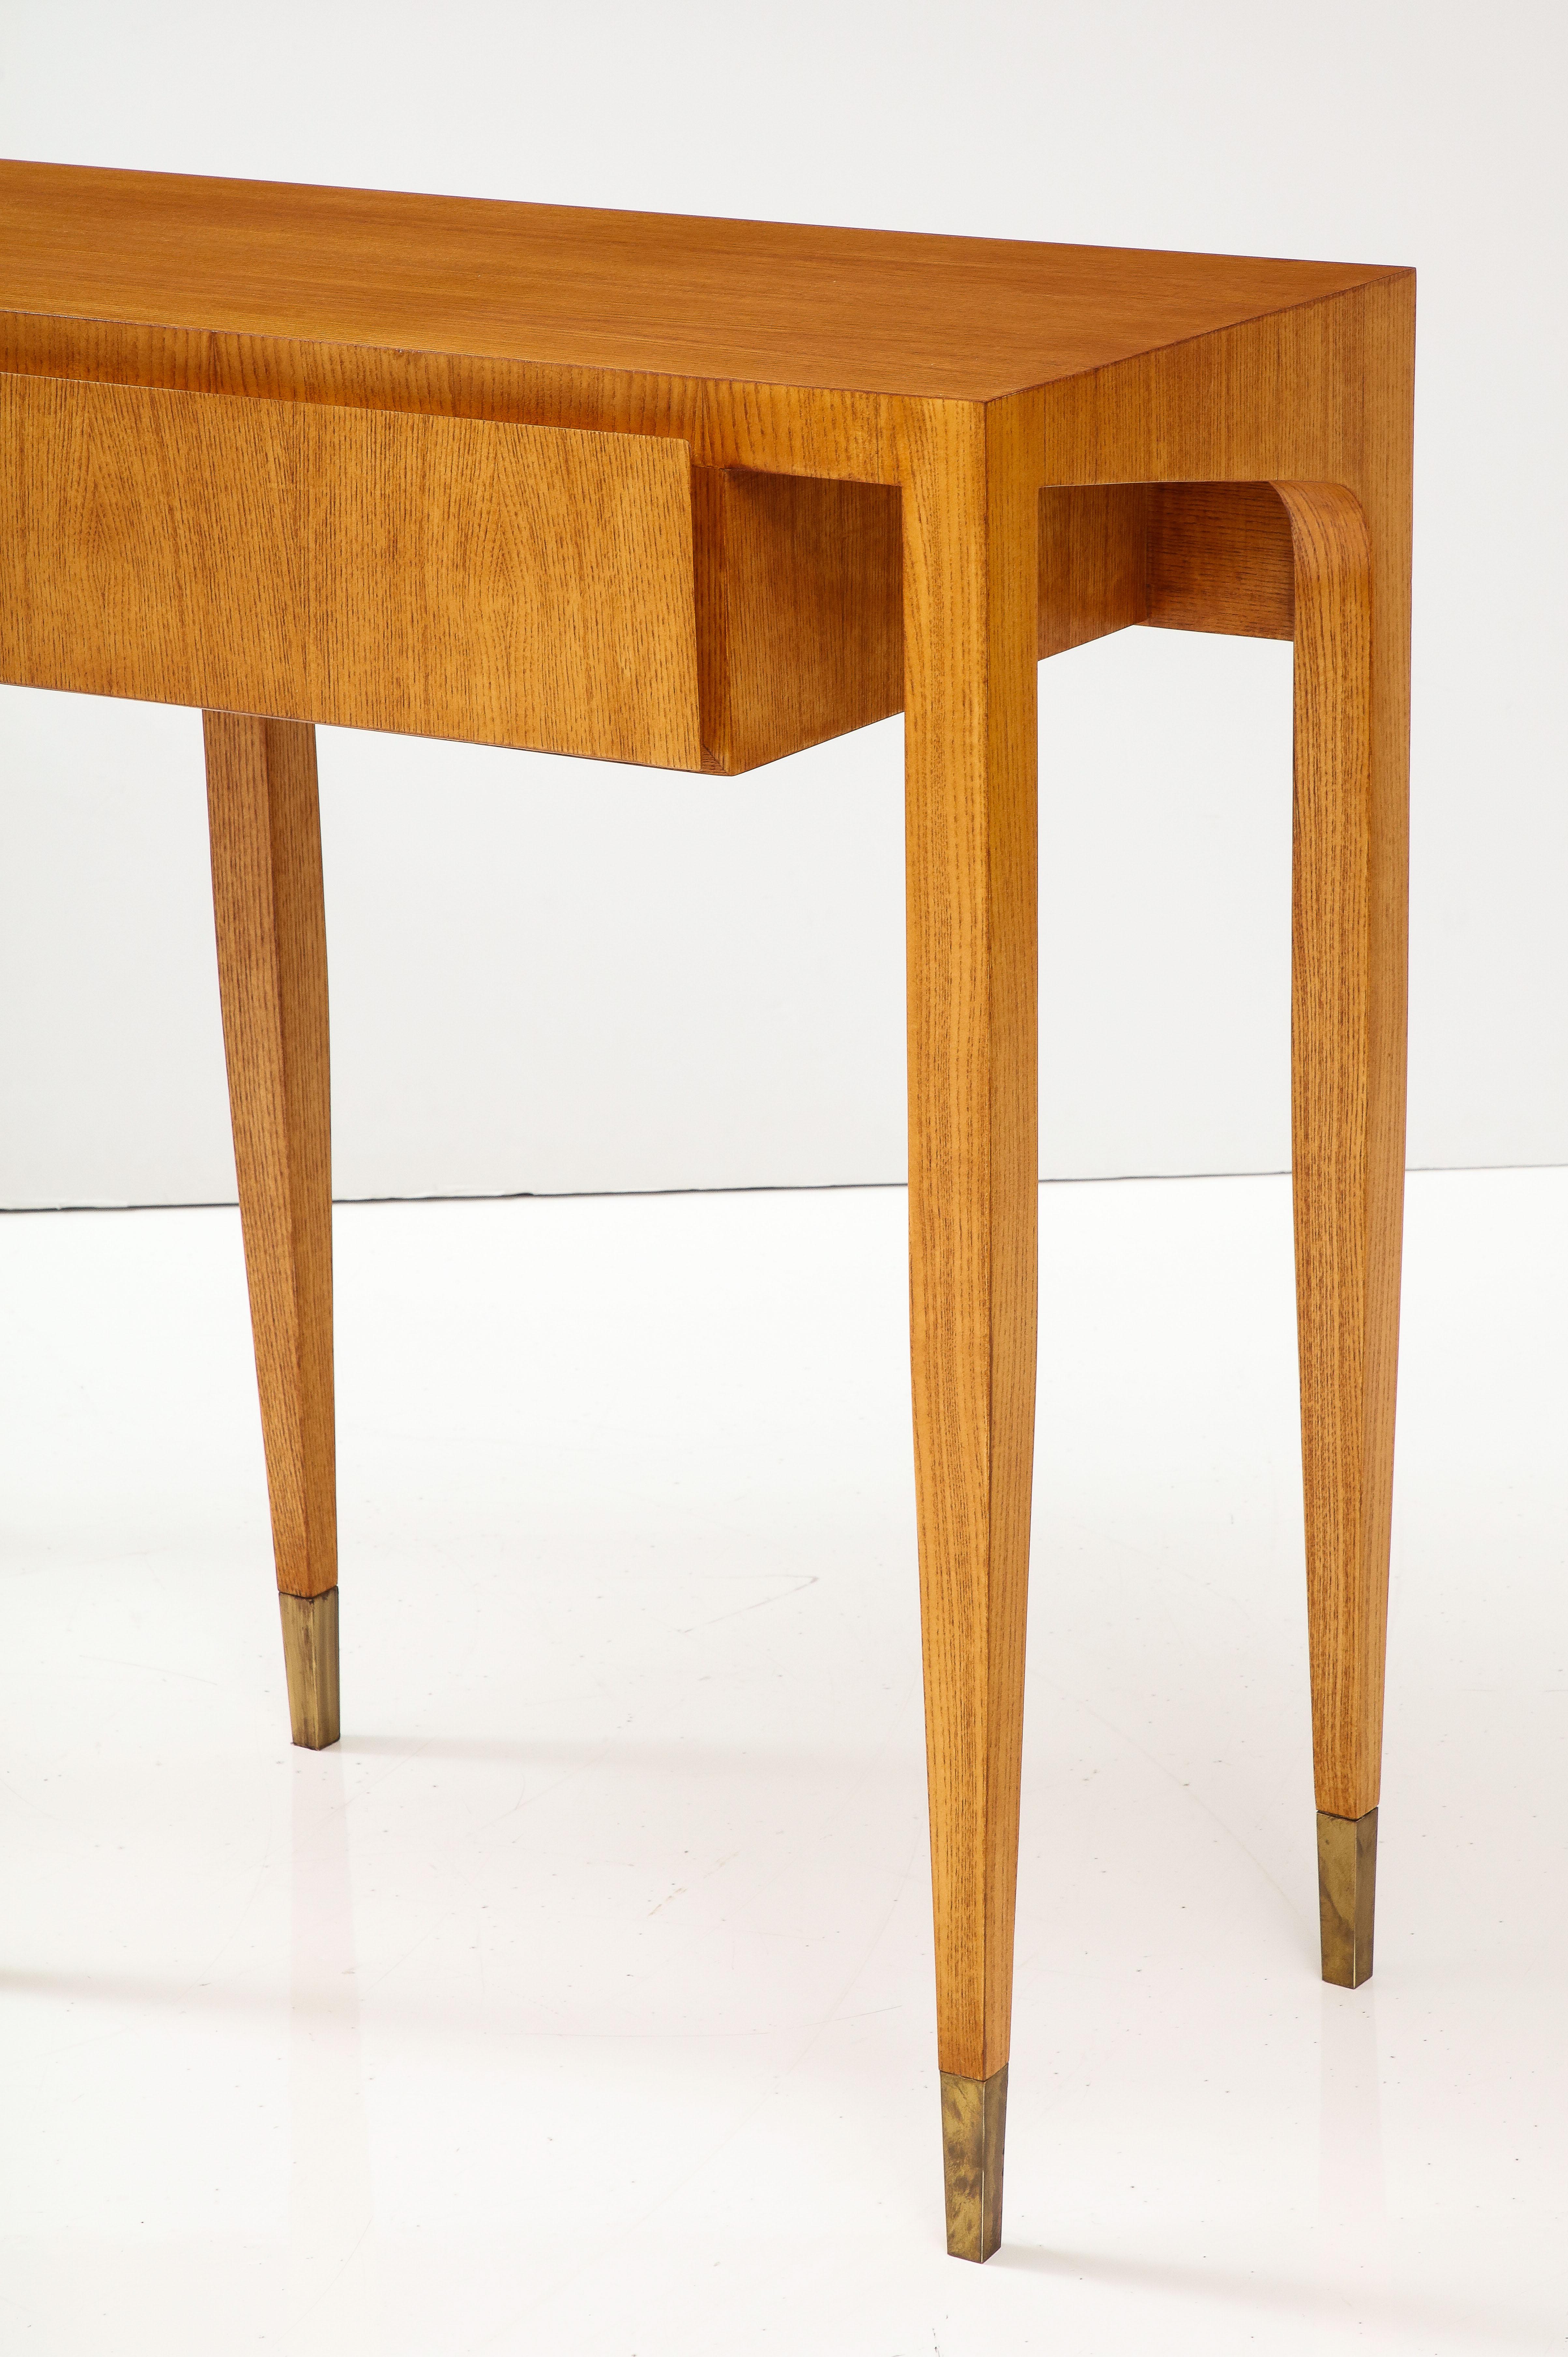 Brass Gio Ponti for Giordano Chiesa Rare Ash Wood Console, Italy, 1950s For Sale